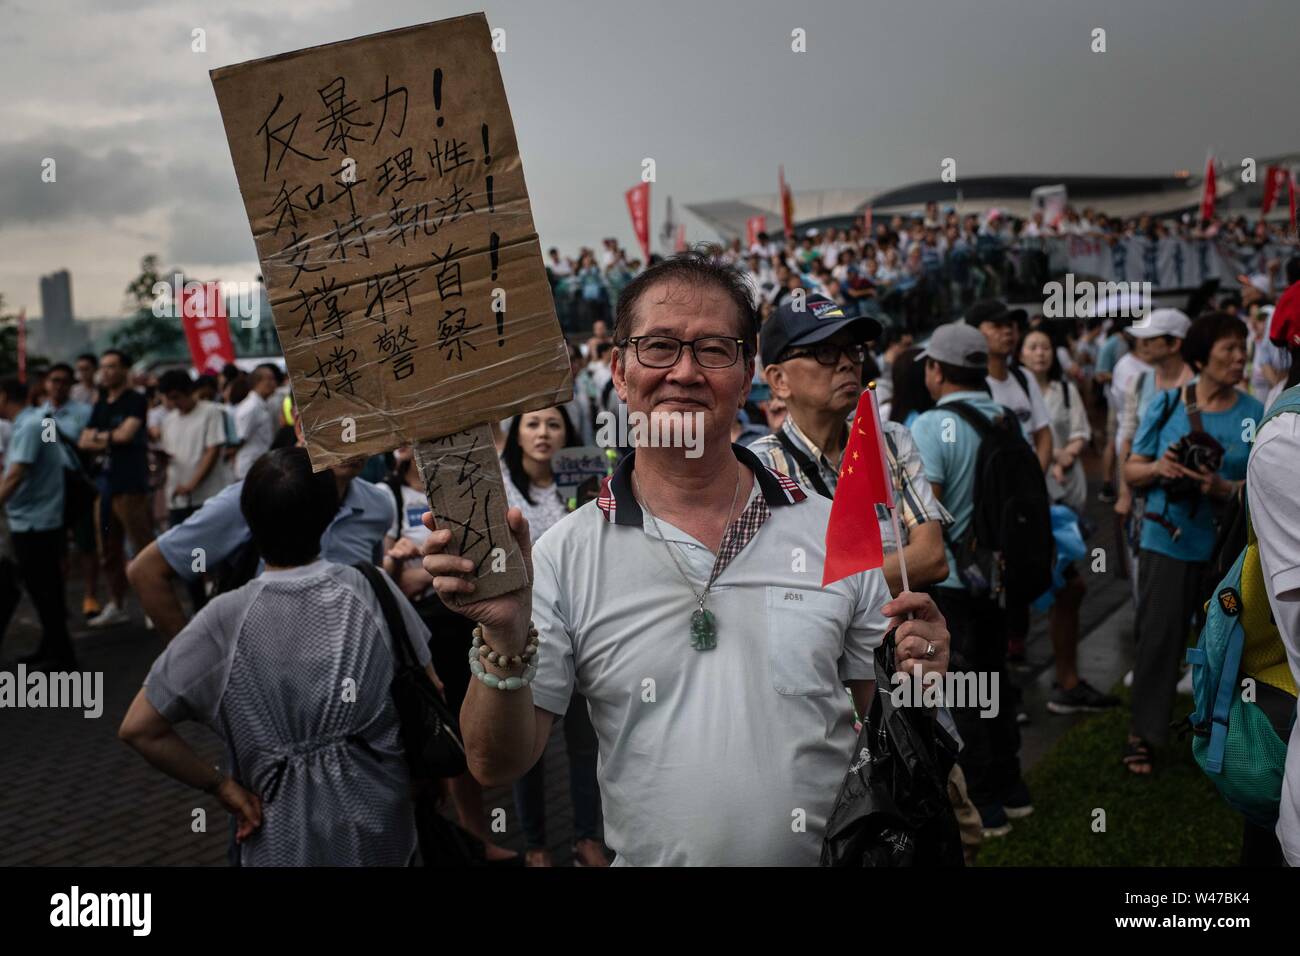 A man holding a placard with message while participating of pro-government Safeguard Hong Kong rally at Tamar Park.Government supporters show up in number of tens of thousands in a pro-police rally, at Tamar Park.  Named Safeguard Hong Kong,  the demonstration was co-organized by 70 pro-Beijing figures and  was attended by local residents, mainland immigrants, members of ethnic minorities, as well as visitors from across the border. Stock Photo